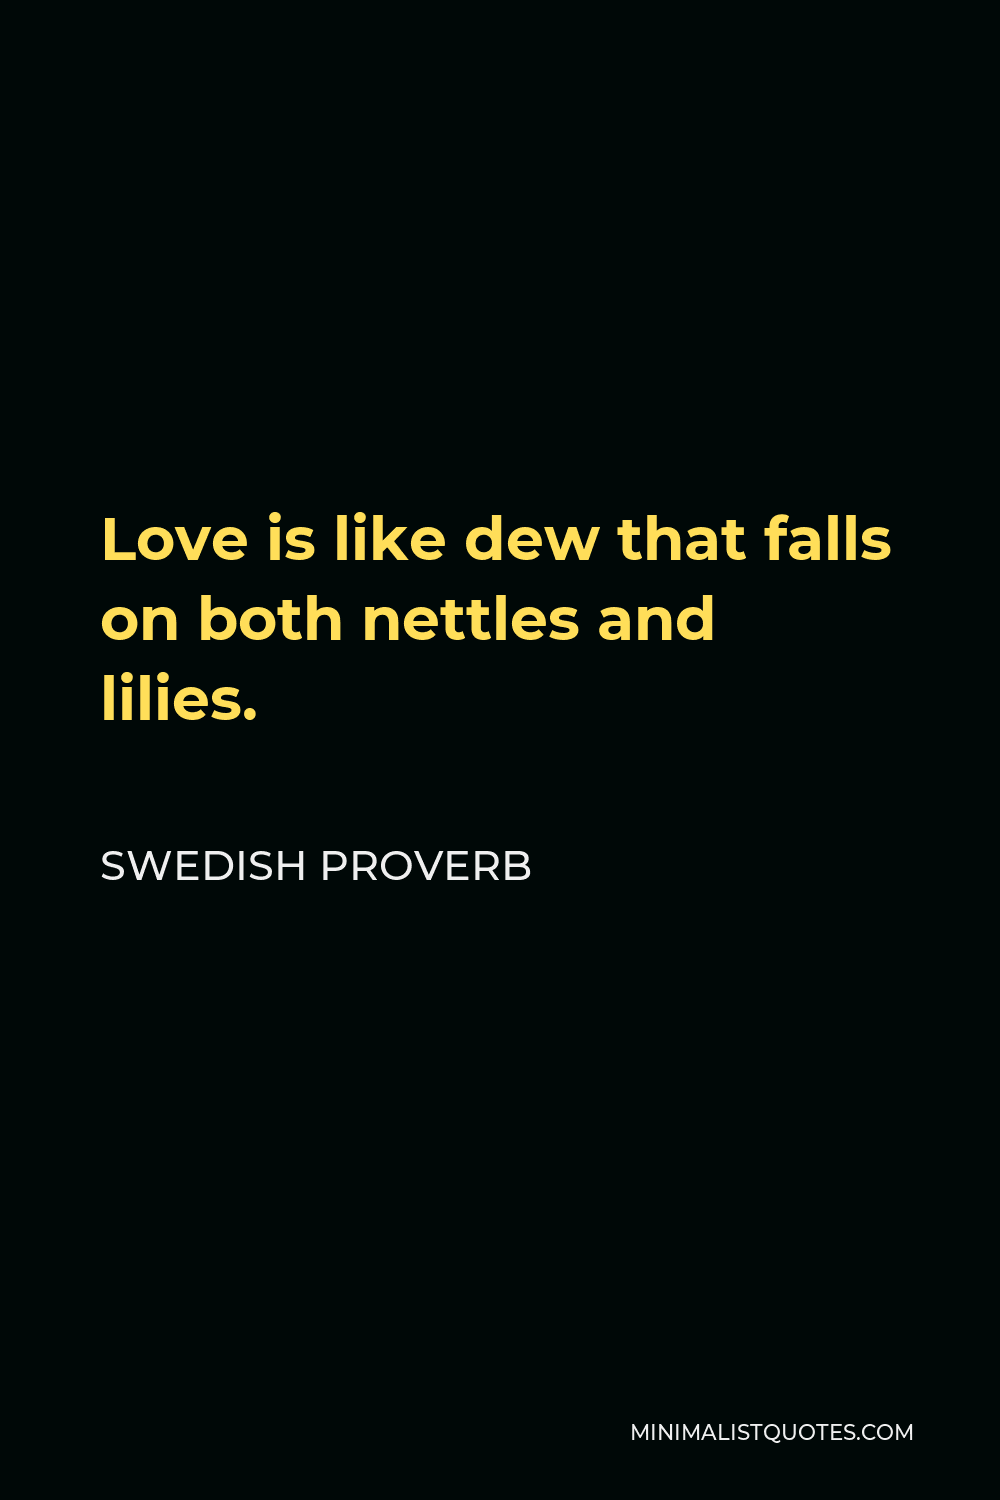 Swedish Proverb Quote - Love is like dew that falls on both nettles and lilies.